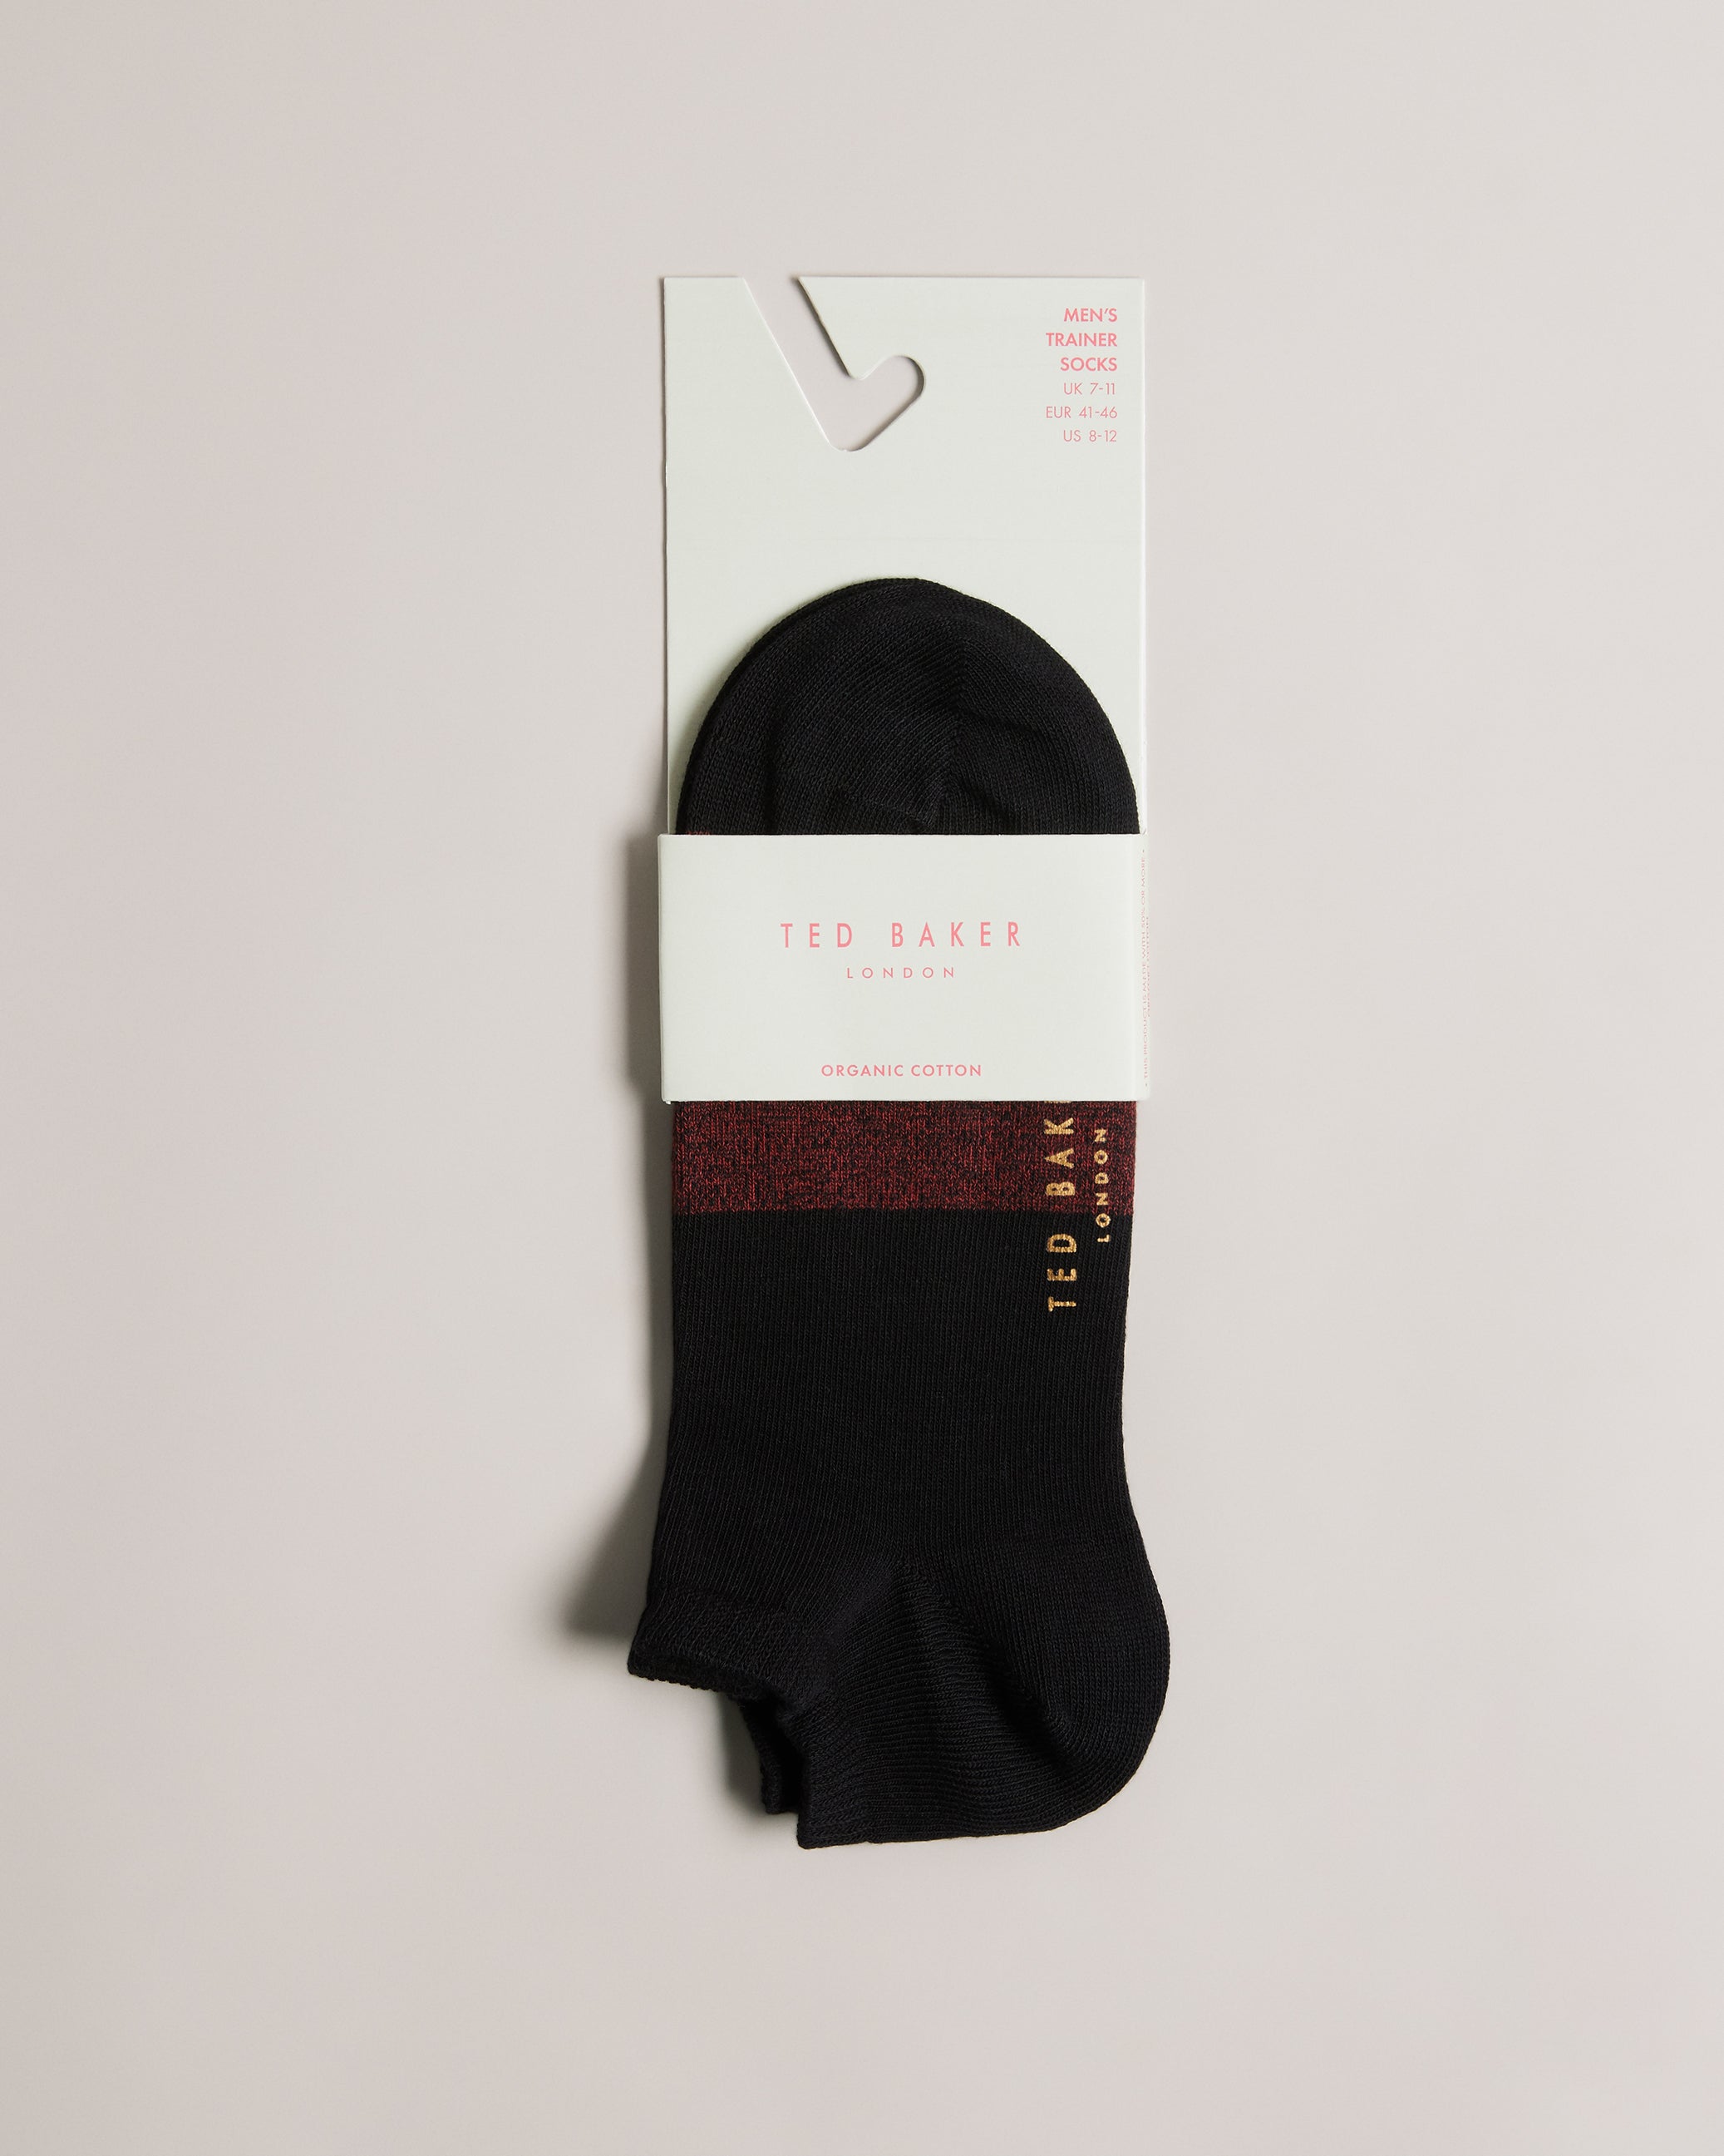 Ted Baker Socks On Sale South Africa - Multicolor Reddpak Three